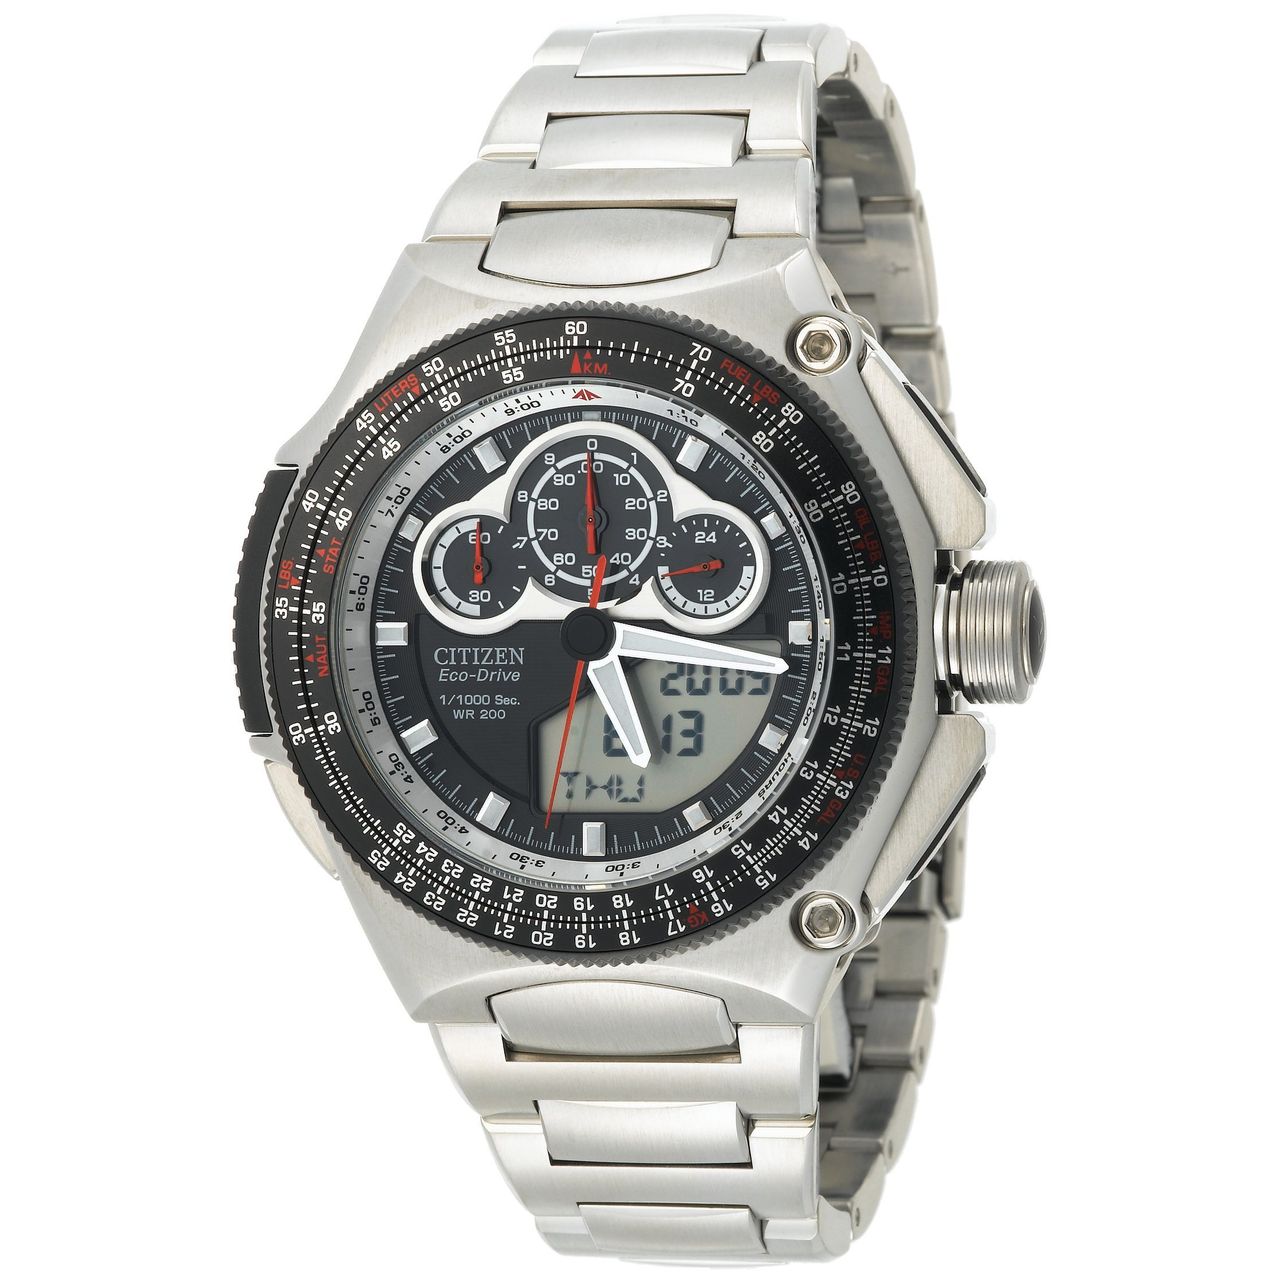 Citizen Men's JW0010-52E Eco-Drive Promaster SST Stainless Steel Watch